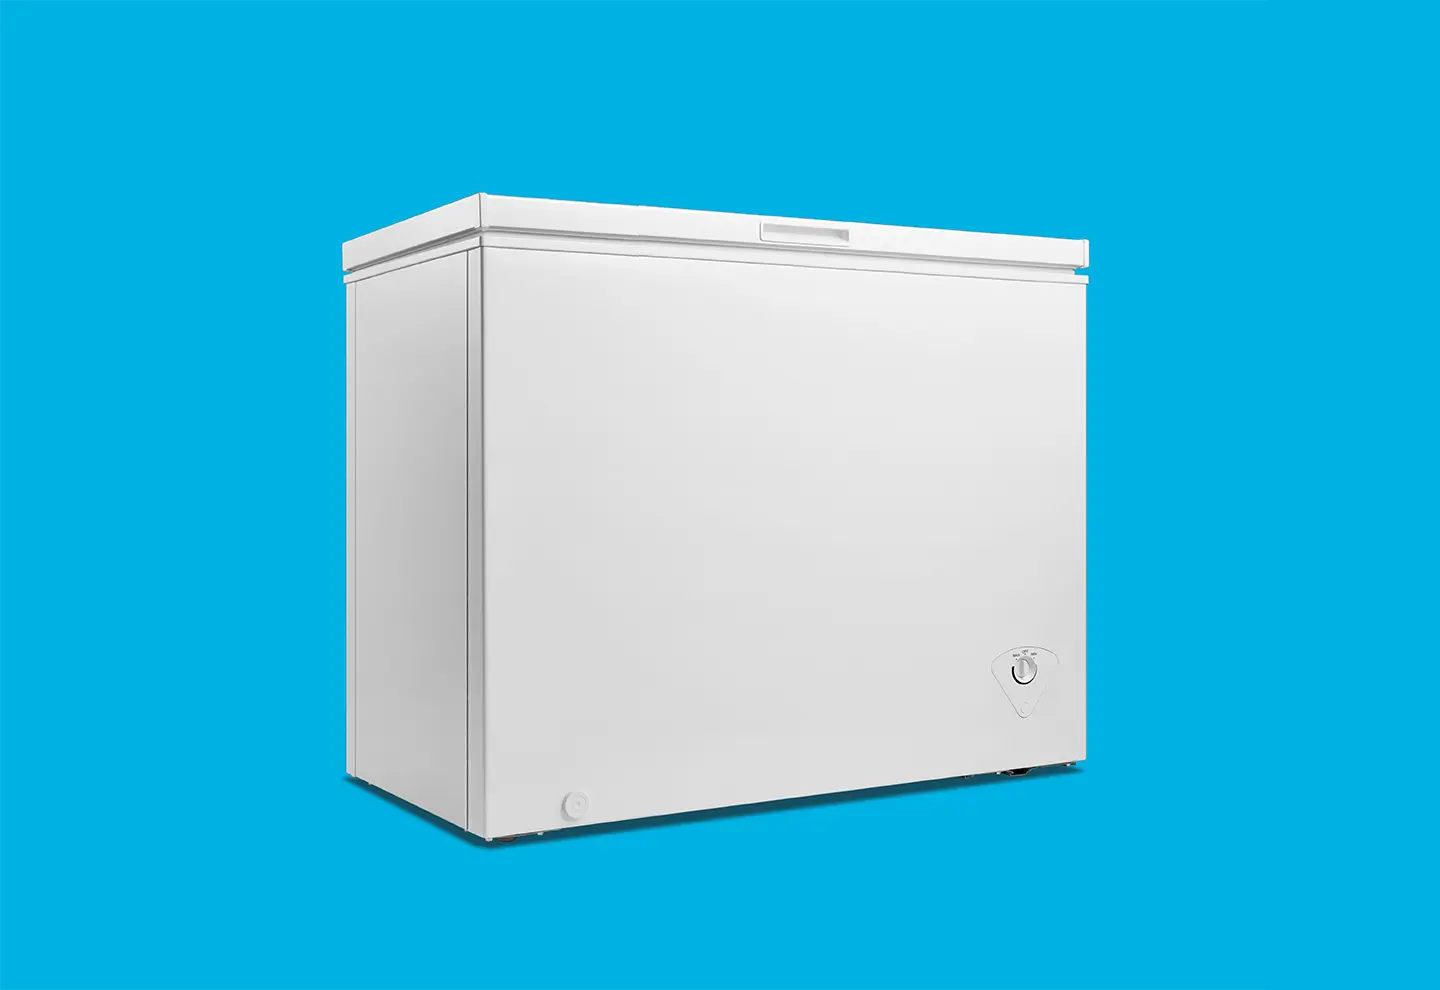 Image of a chest freezer. 